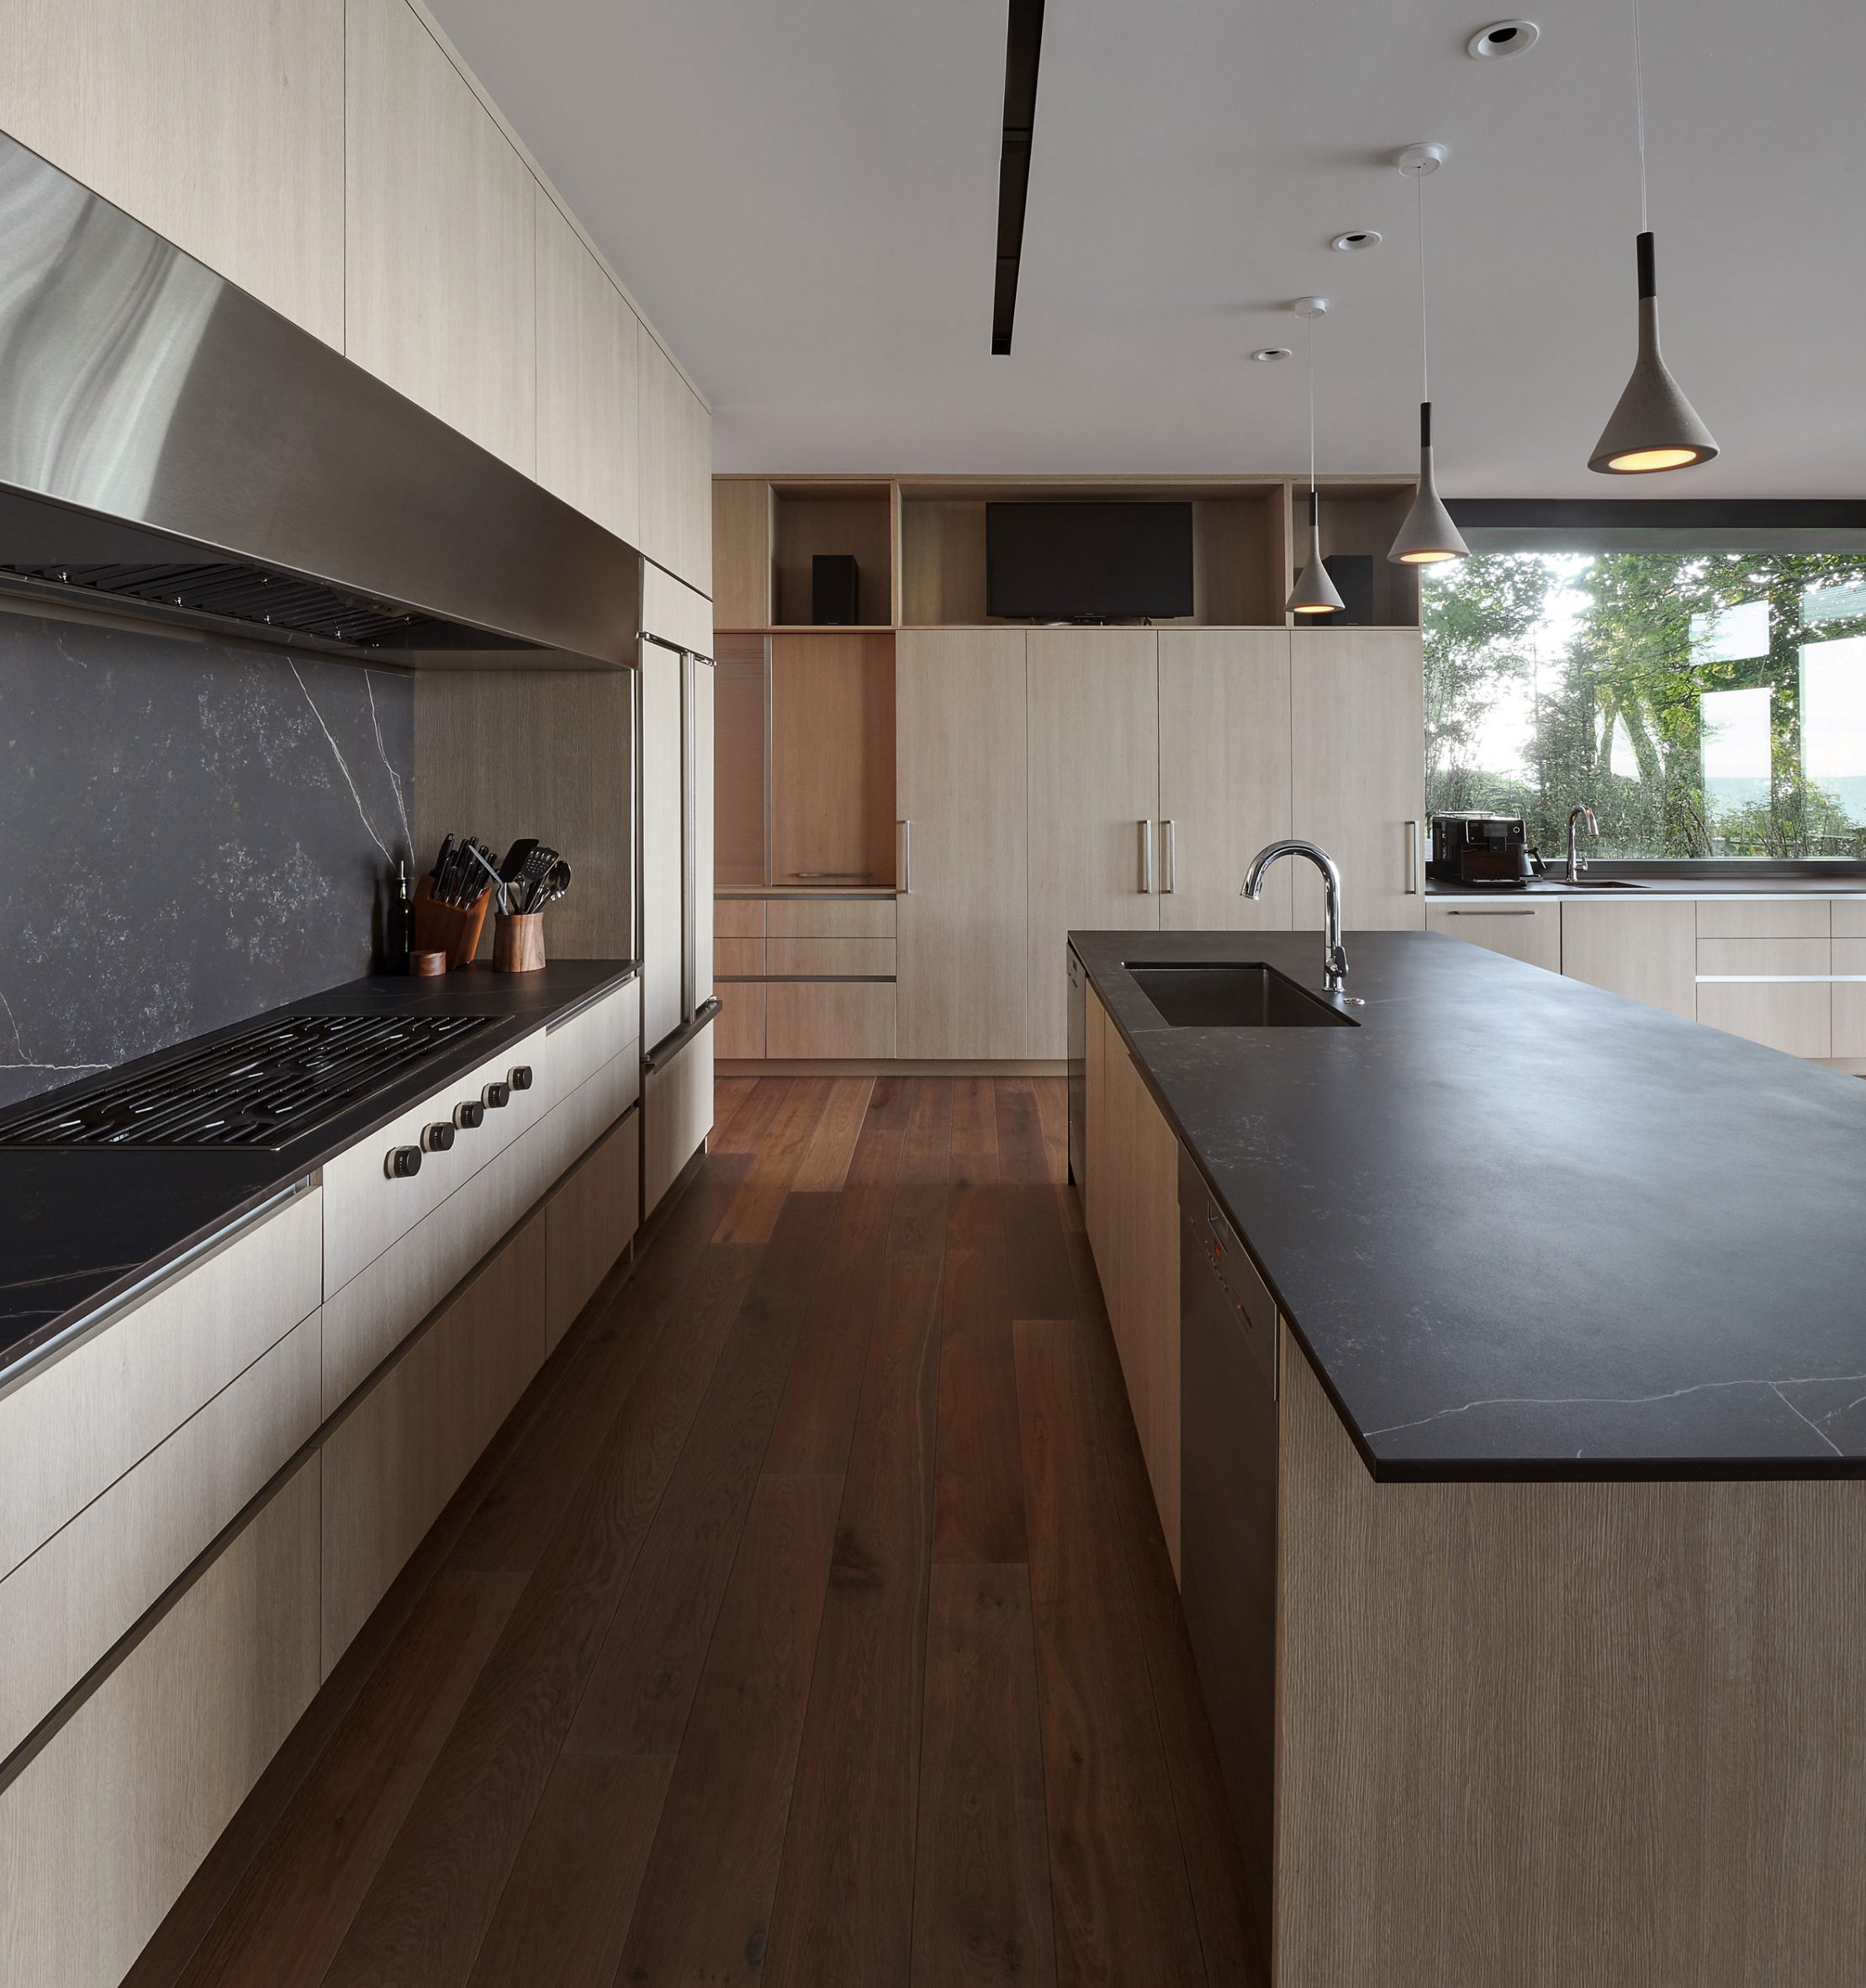 A kitchen with wood flooring, wood kitchen units and a kitchen island with a dark countertop